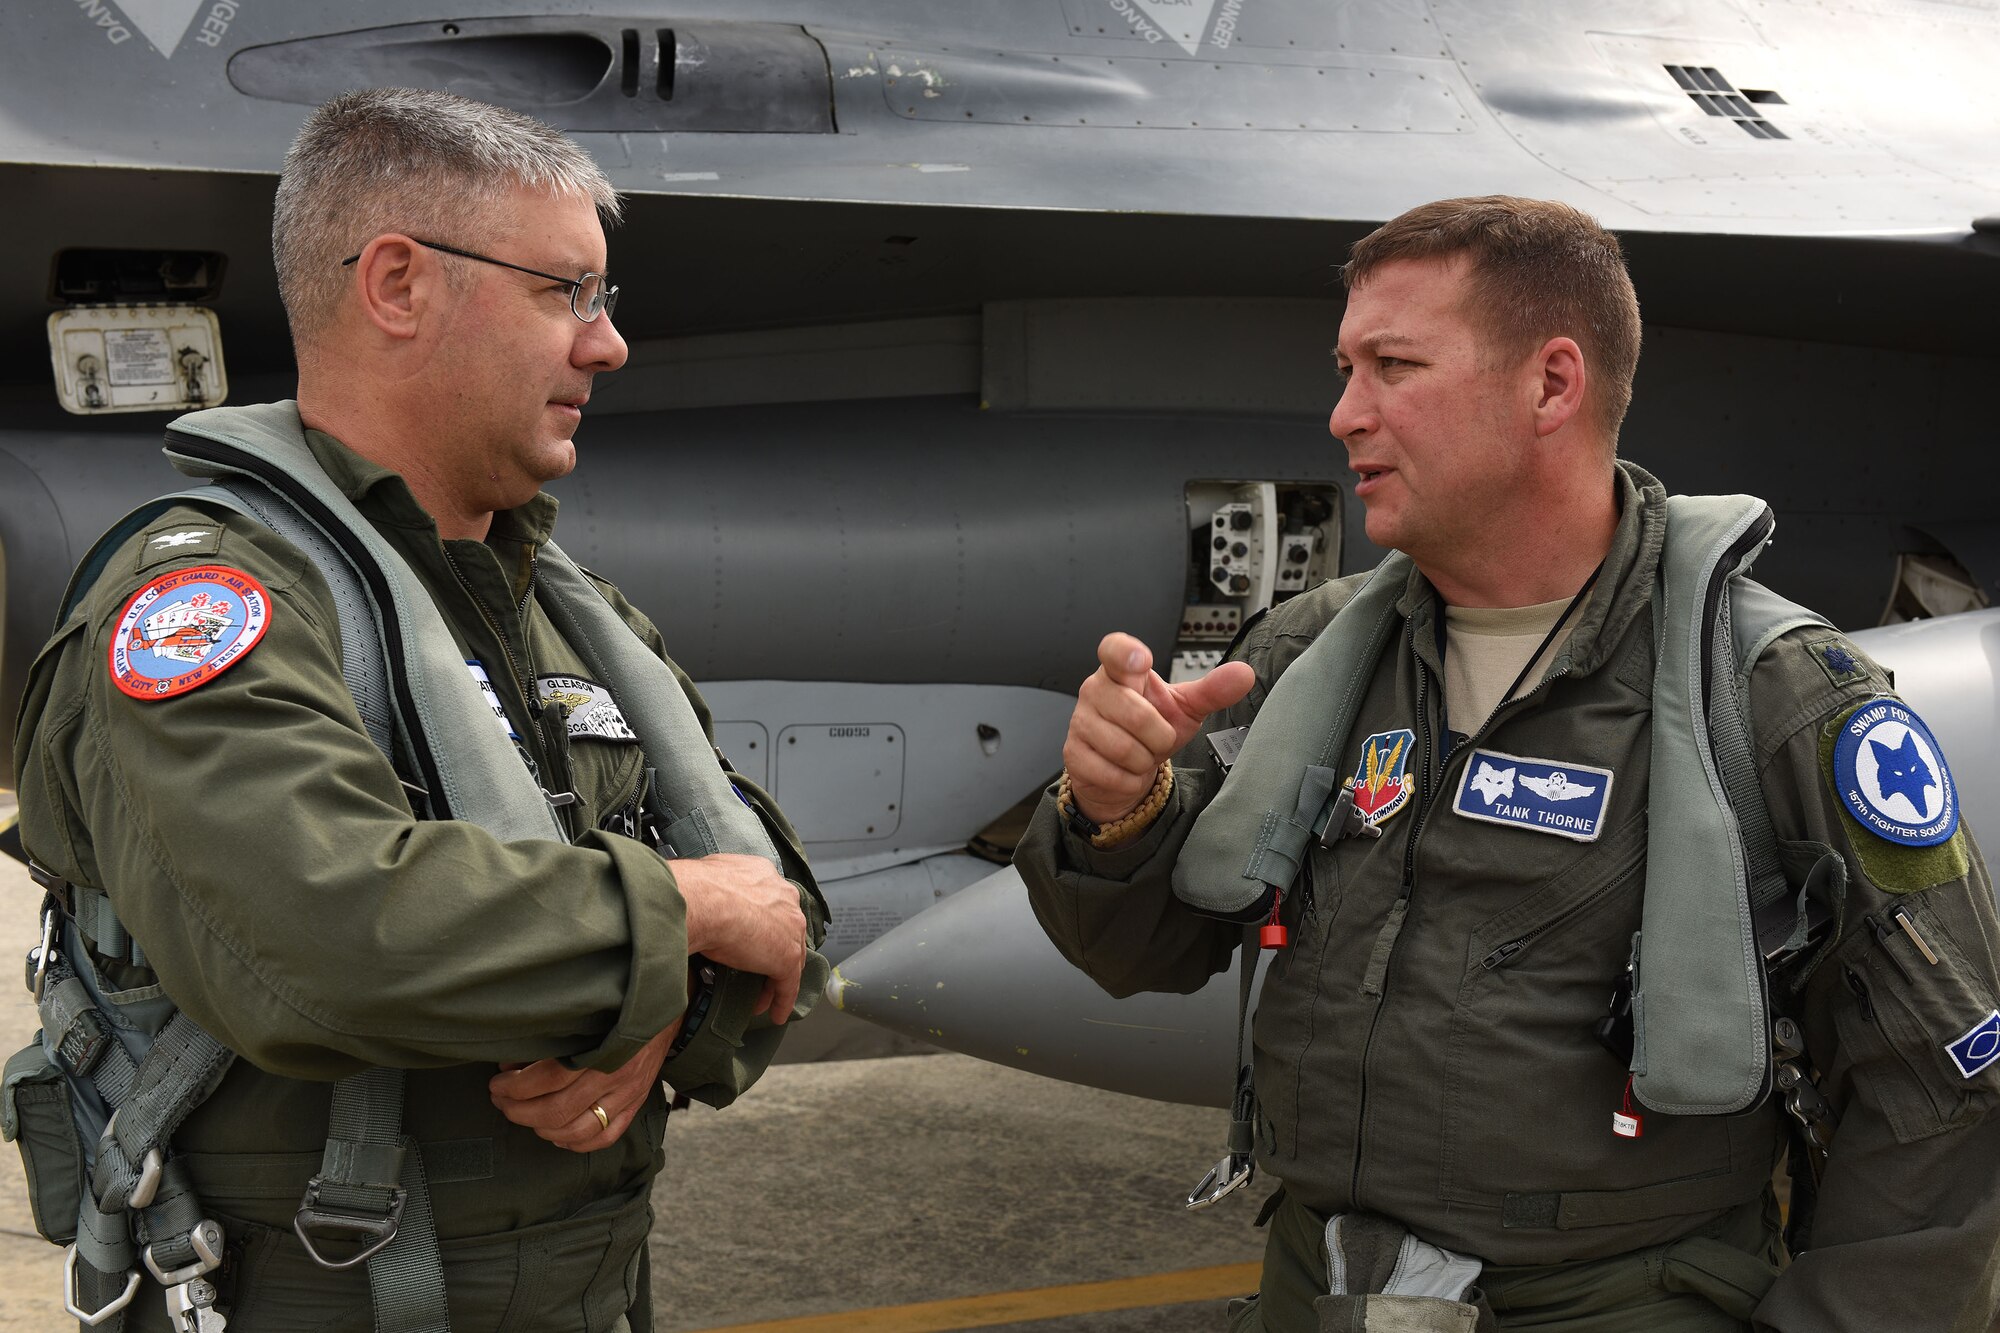 U.S. Coast Guard Capt. Eric Gleason, assigned to USCG Air Station Atlantic City, talks with Lt. Col. Andrew Thorne, 169th Fighter Wing, South Carolina Air National Guard, following an Aerospace Control Alert familiarization flight in an F-16 Fighting Falcon during the Southeast ACA Conference June 5. The 169th Fighter Wing, in close coordination with the Continental U.S. North American Aerospace Defense Command Region, the Eastern Air Defense Sector and the Federal Aviation Administration, hosted the Southeast Aerospace Control Alert Conference at McEntire Joint National Guard Base, S.C., June 5-7. The conference was a total-team training initiative to improve homeland defense capabilities by developing techniques with joint forces during small-scale exercises. This conference consisted of South Carolina Air National Guard 169th FW F-16 fighter jets, U.S. Coast Guard Rotary Wing Air Intercept Squadron MH-65D Dolphin helicopters from USCG Air Station Atlantic City and South Carolina Wing Civil Air Patrol aircraft and crews to hone their skills with tactical-level air-intercept procedures. (U.S. Air National Guard photo by Senior Master Sgt. Edward Snyder)